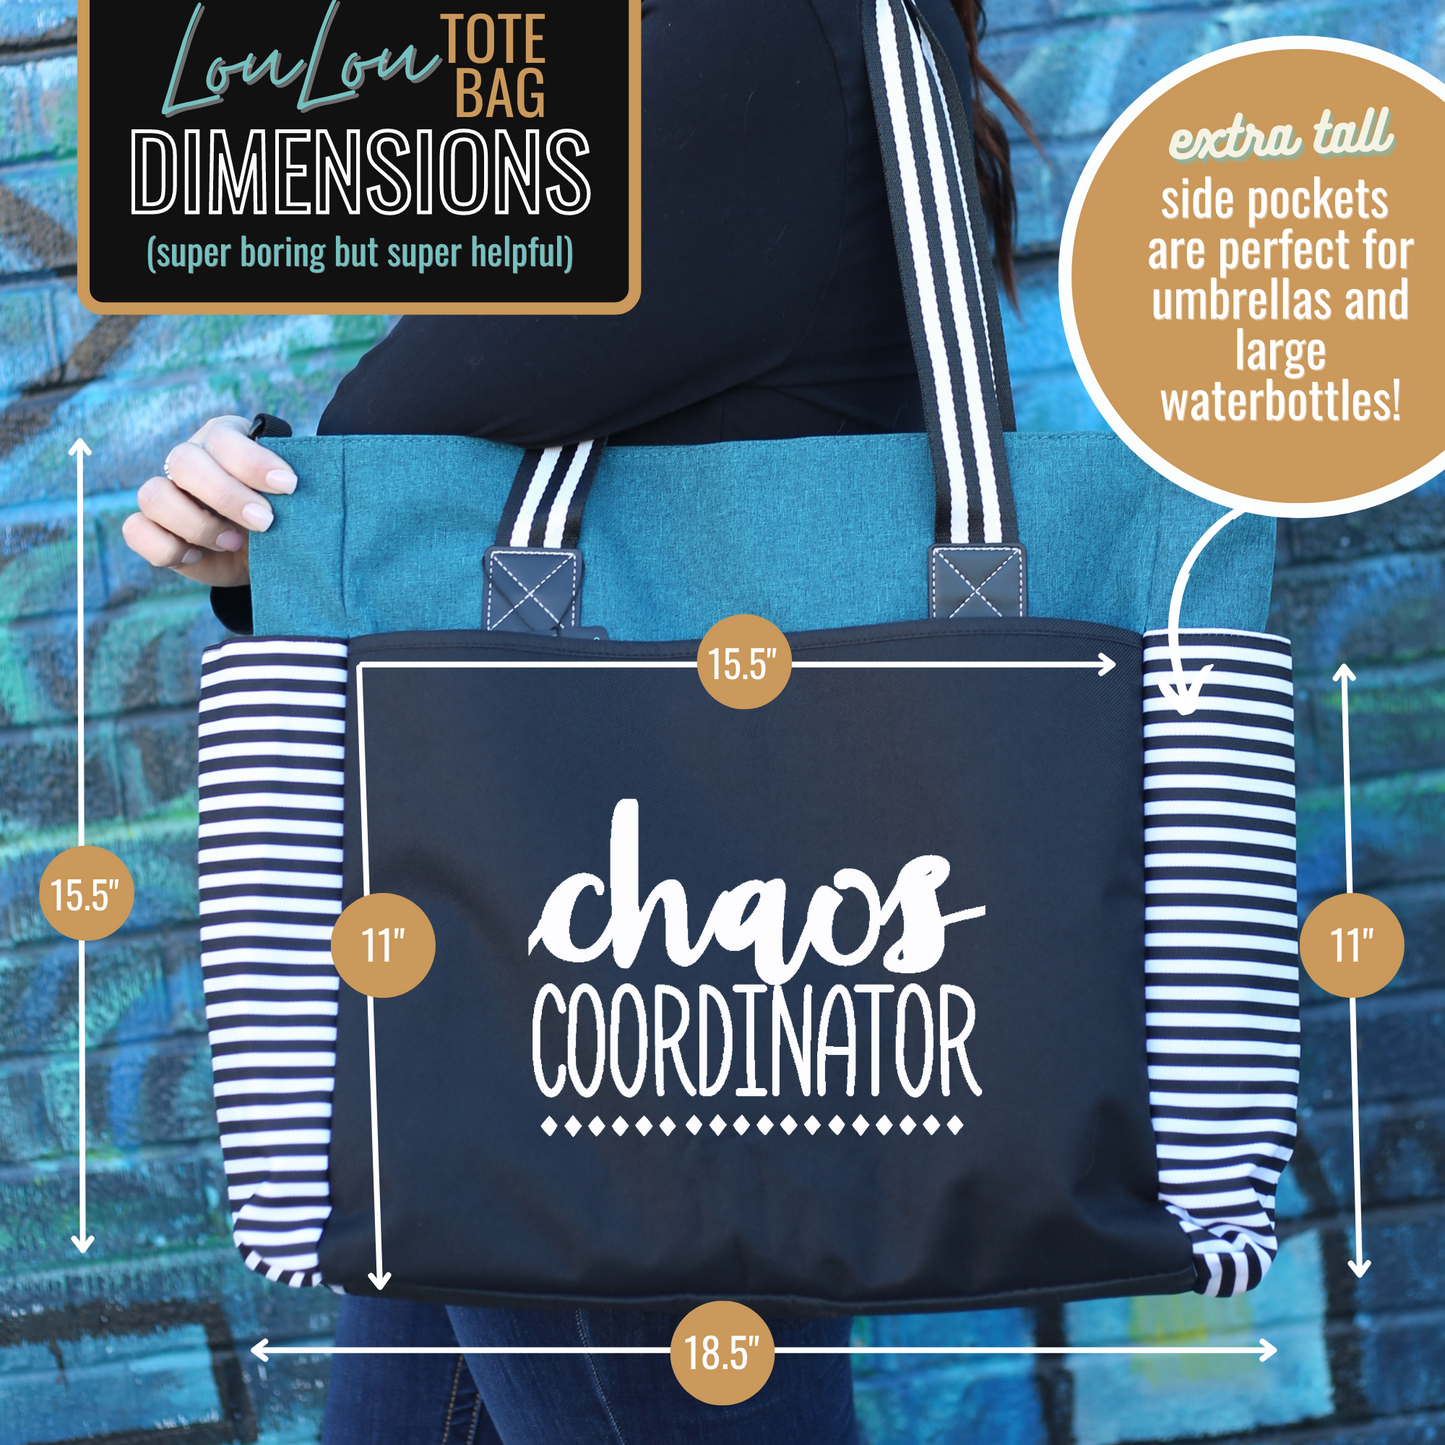 Chaos Coordinator LouLou Teal Tote Bag for Bosses